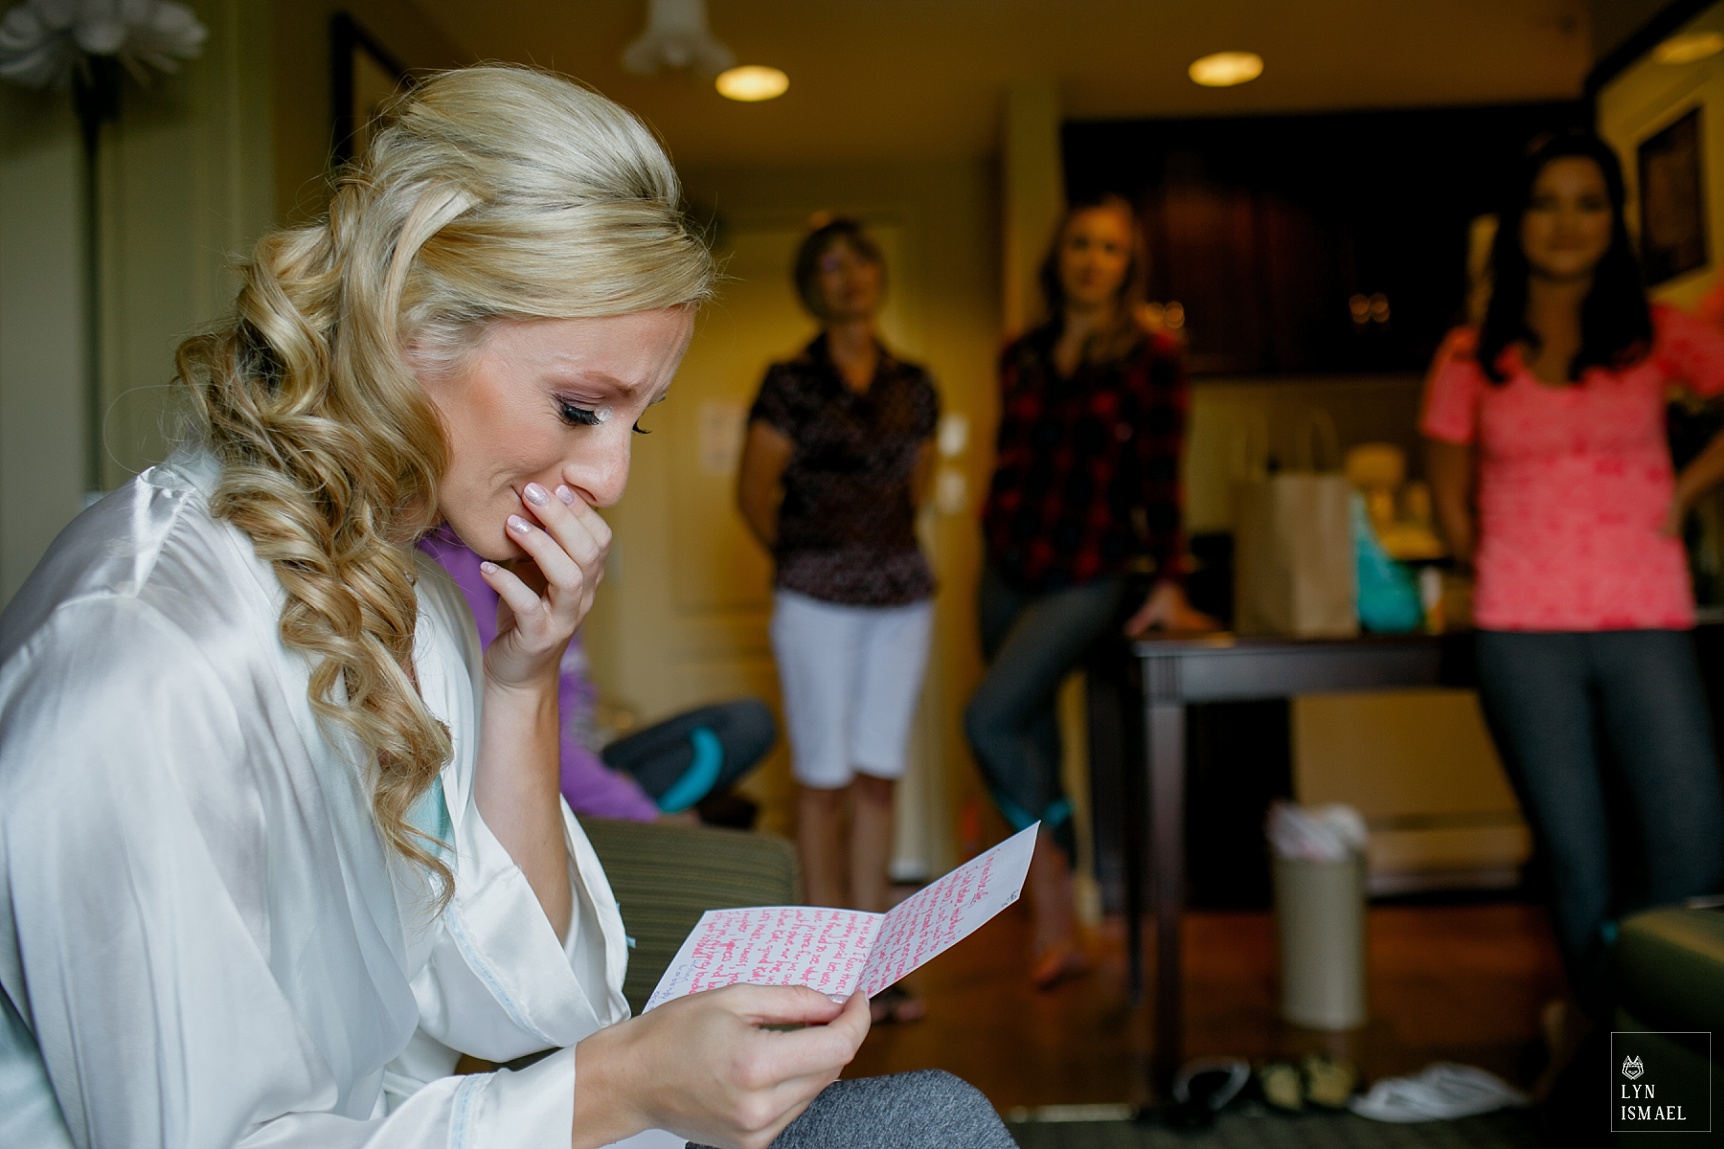 Bride reacts to her groom's letter as her bridesmaids watch on.